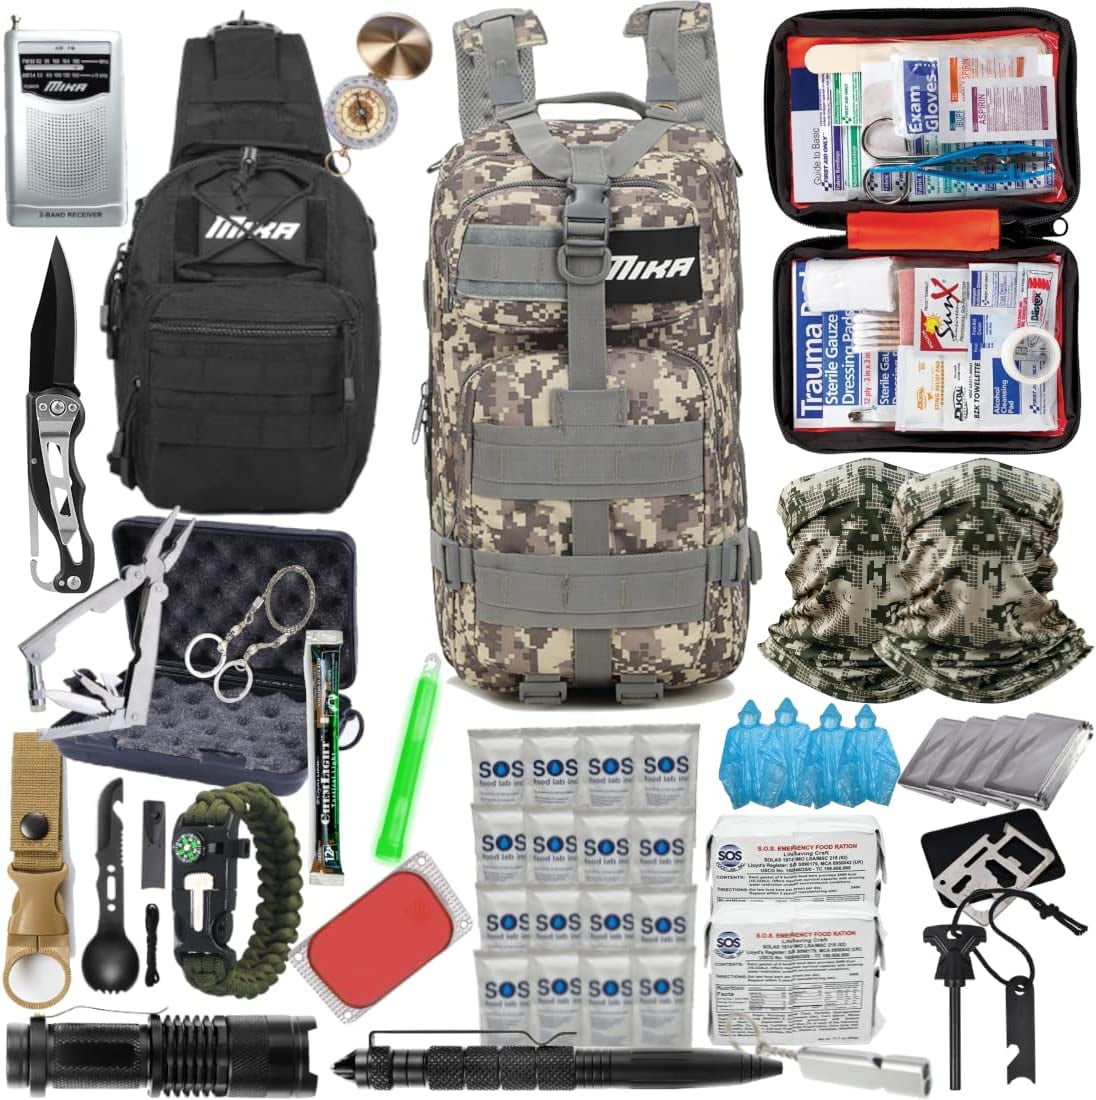 72 Hour 2 Person Emergency Survival Bug Out Bag Camping Kit Backpack New 